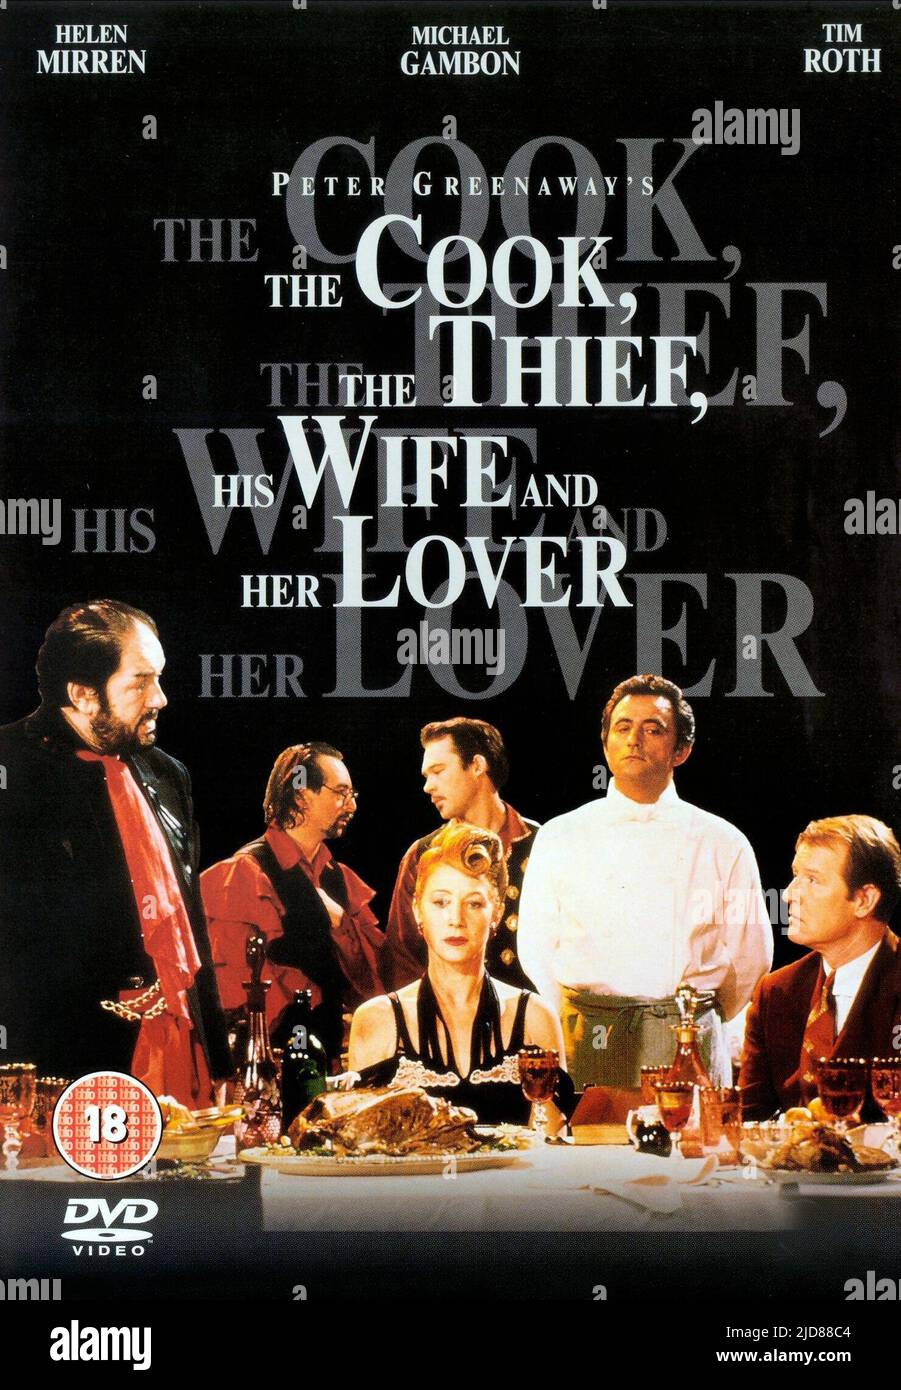 GAMBON,COOK,STEWART,MIRREN,BOHRINGER,POSTER, THE COOK  THE THIEF  HIS WIFE and HER LOVER, 1989, Stock Photo